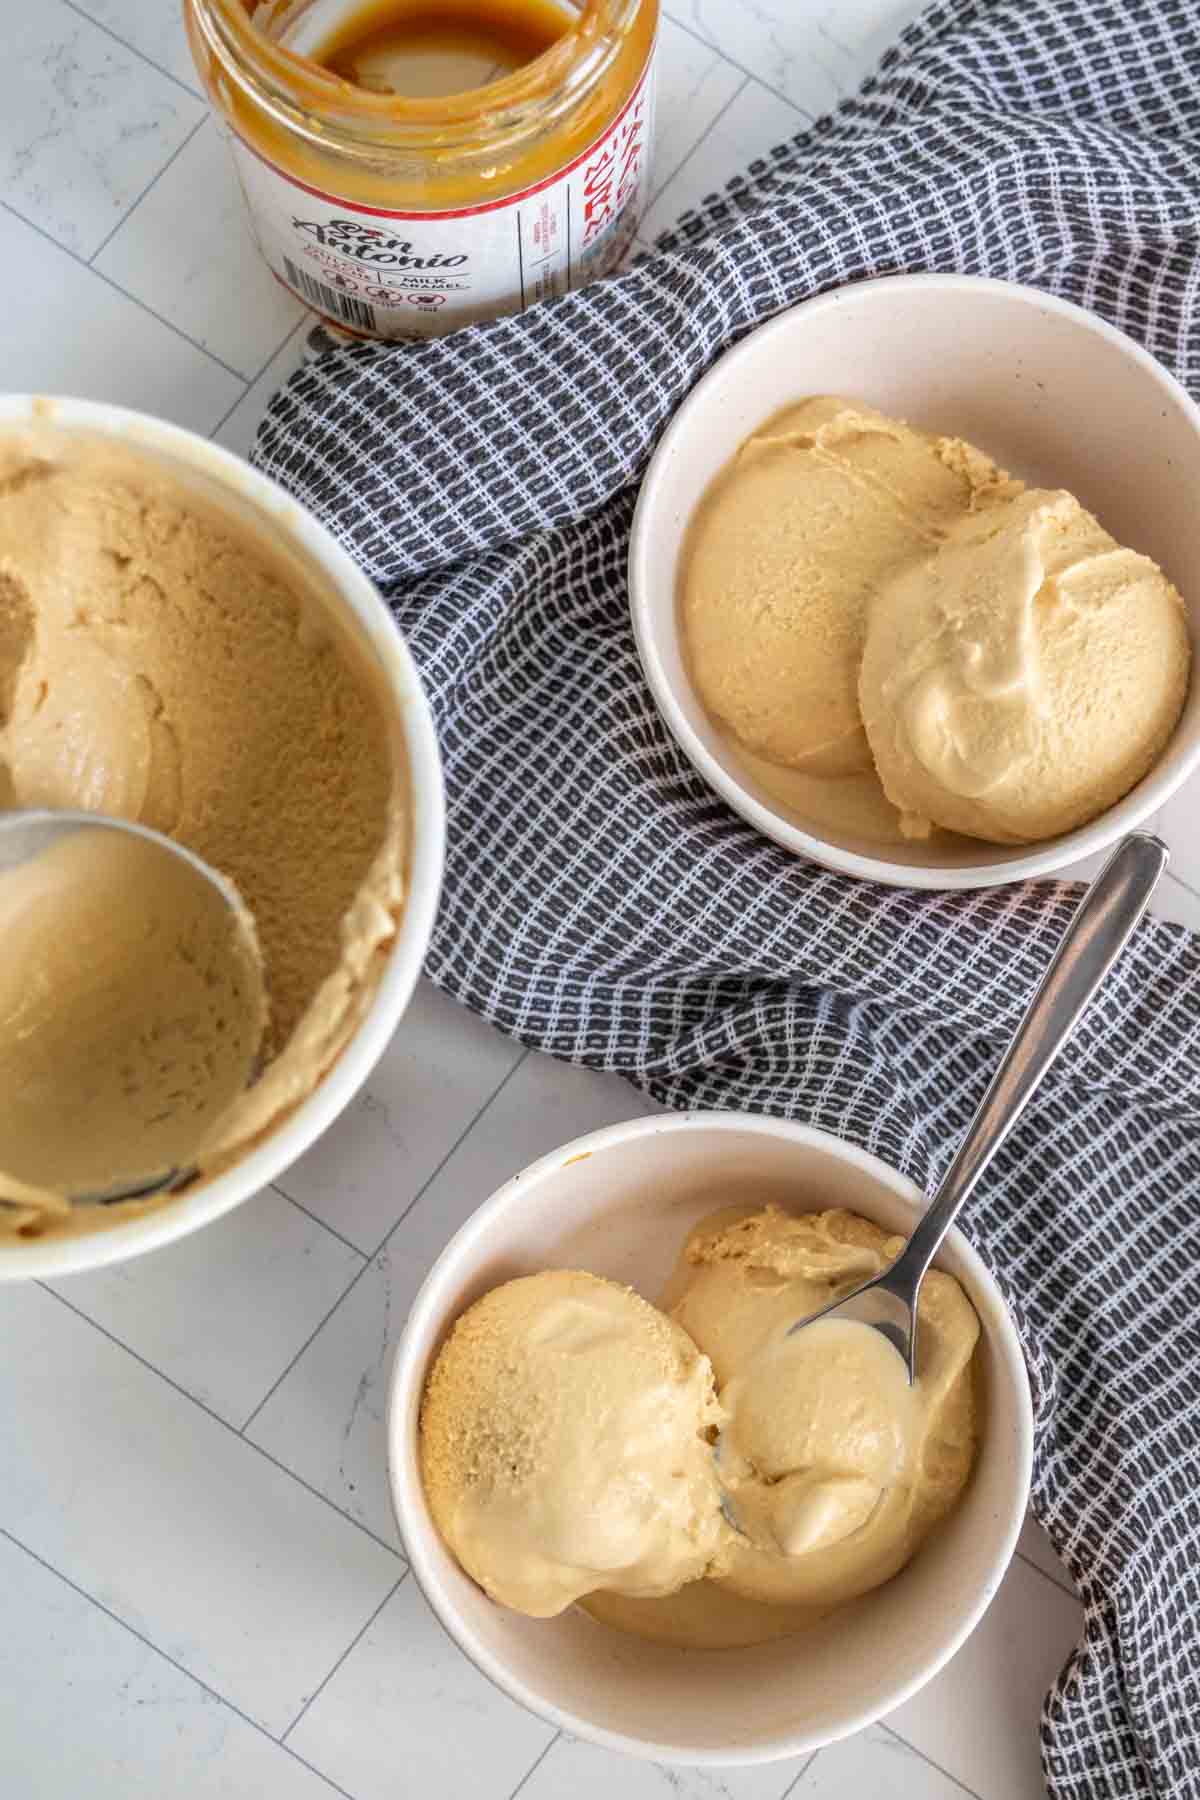 Two bowls of caramel ice cream with spoons placed on a checkered cloth, next to an open jar of caramel sauce on a tiled surface.